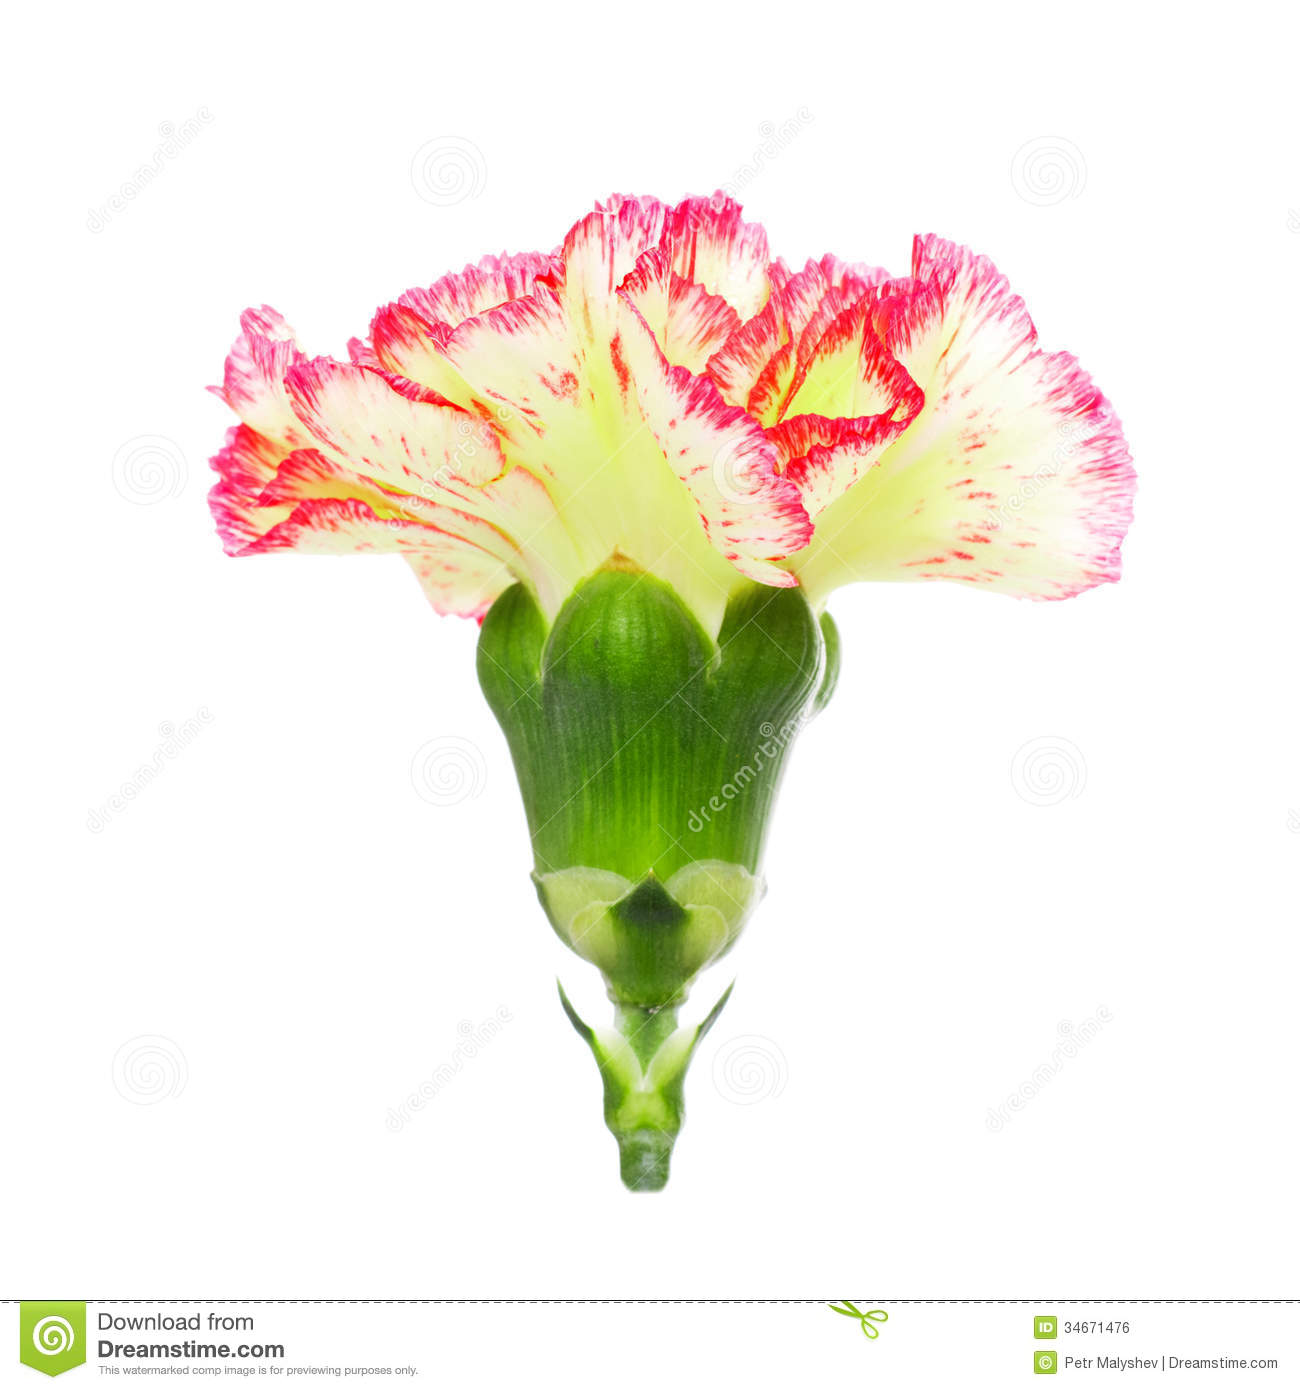 Pink And Yellow Carnation Royalty Free Stock Image   Image  34671476